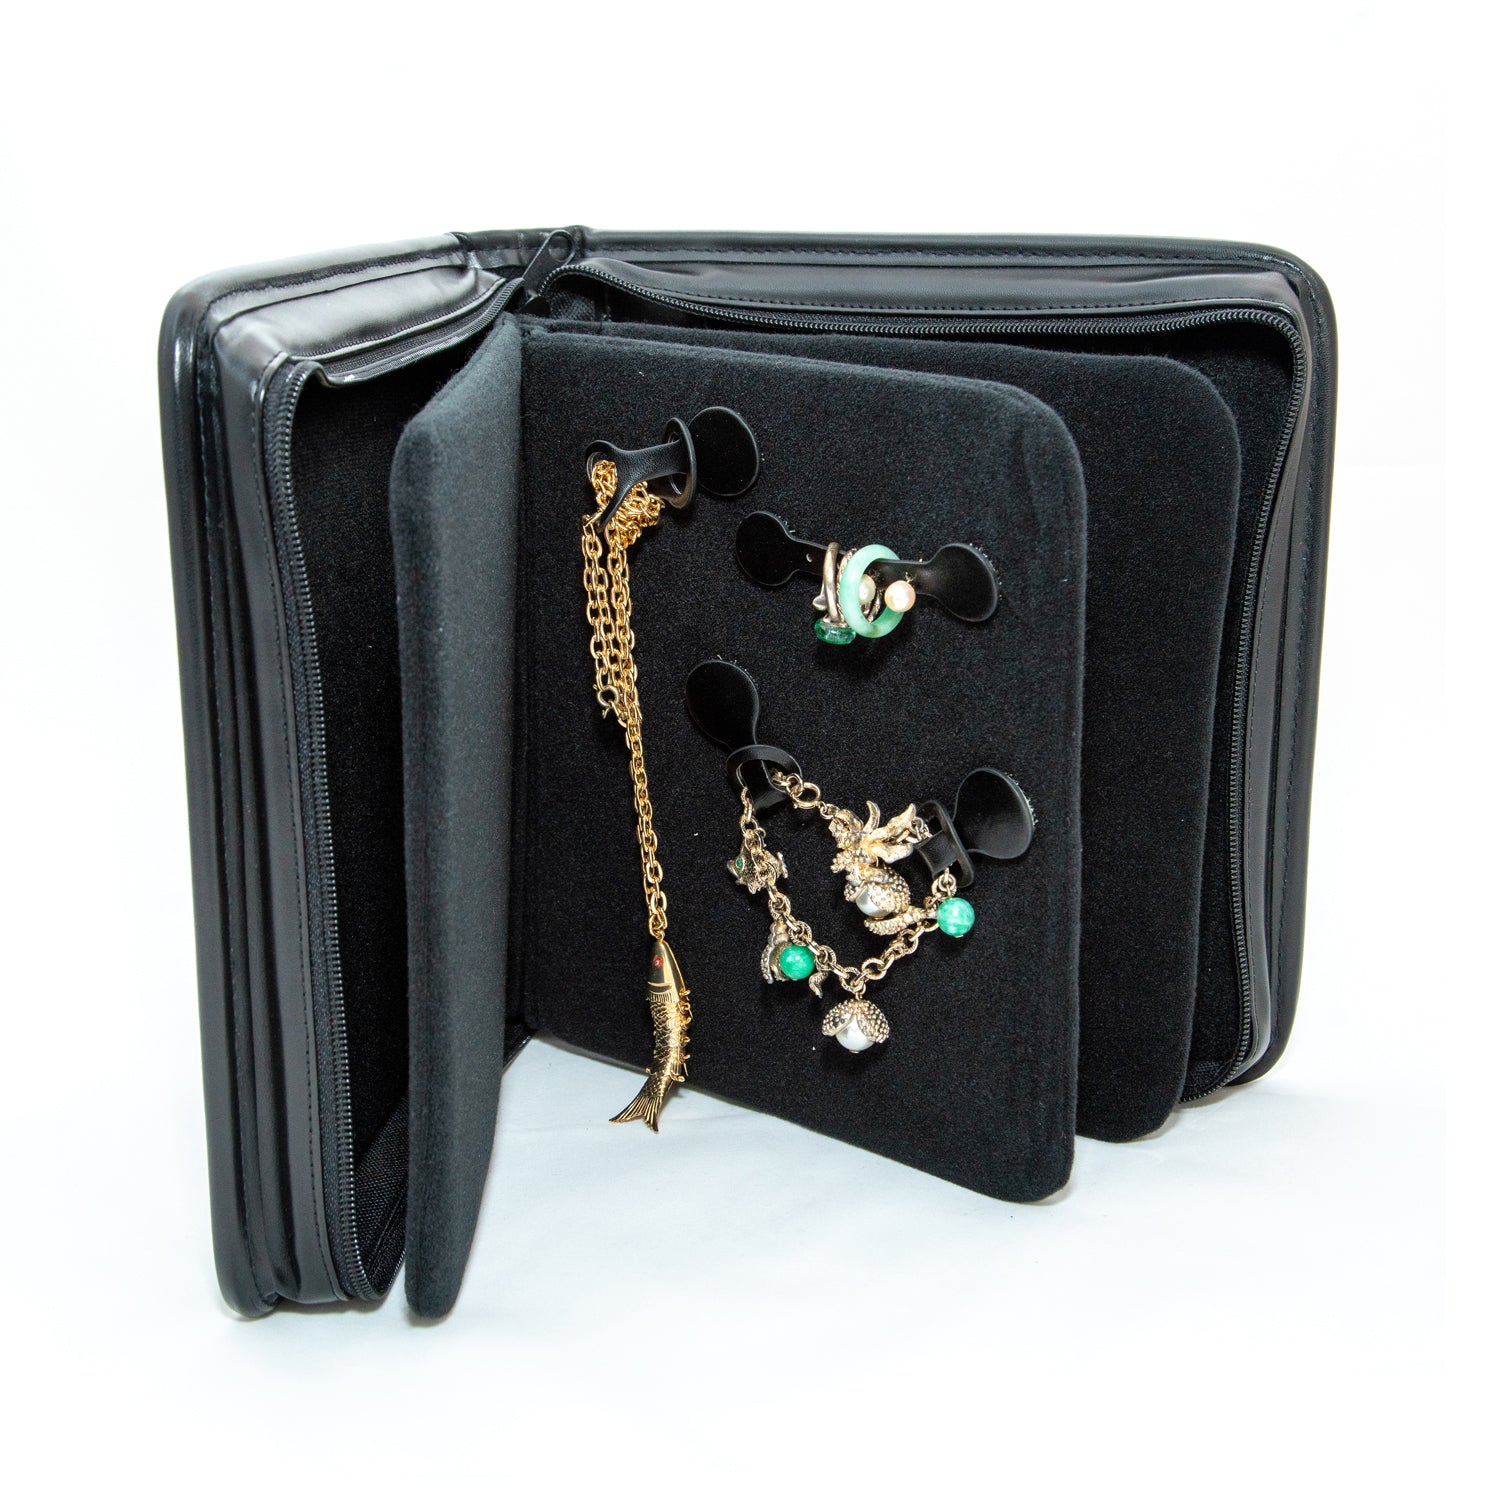 The BlingBook - Portable Jewelry Management and Organization System